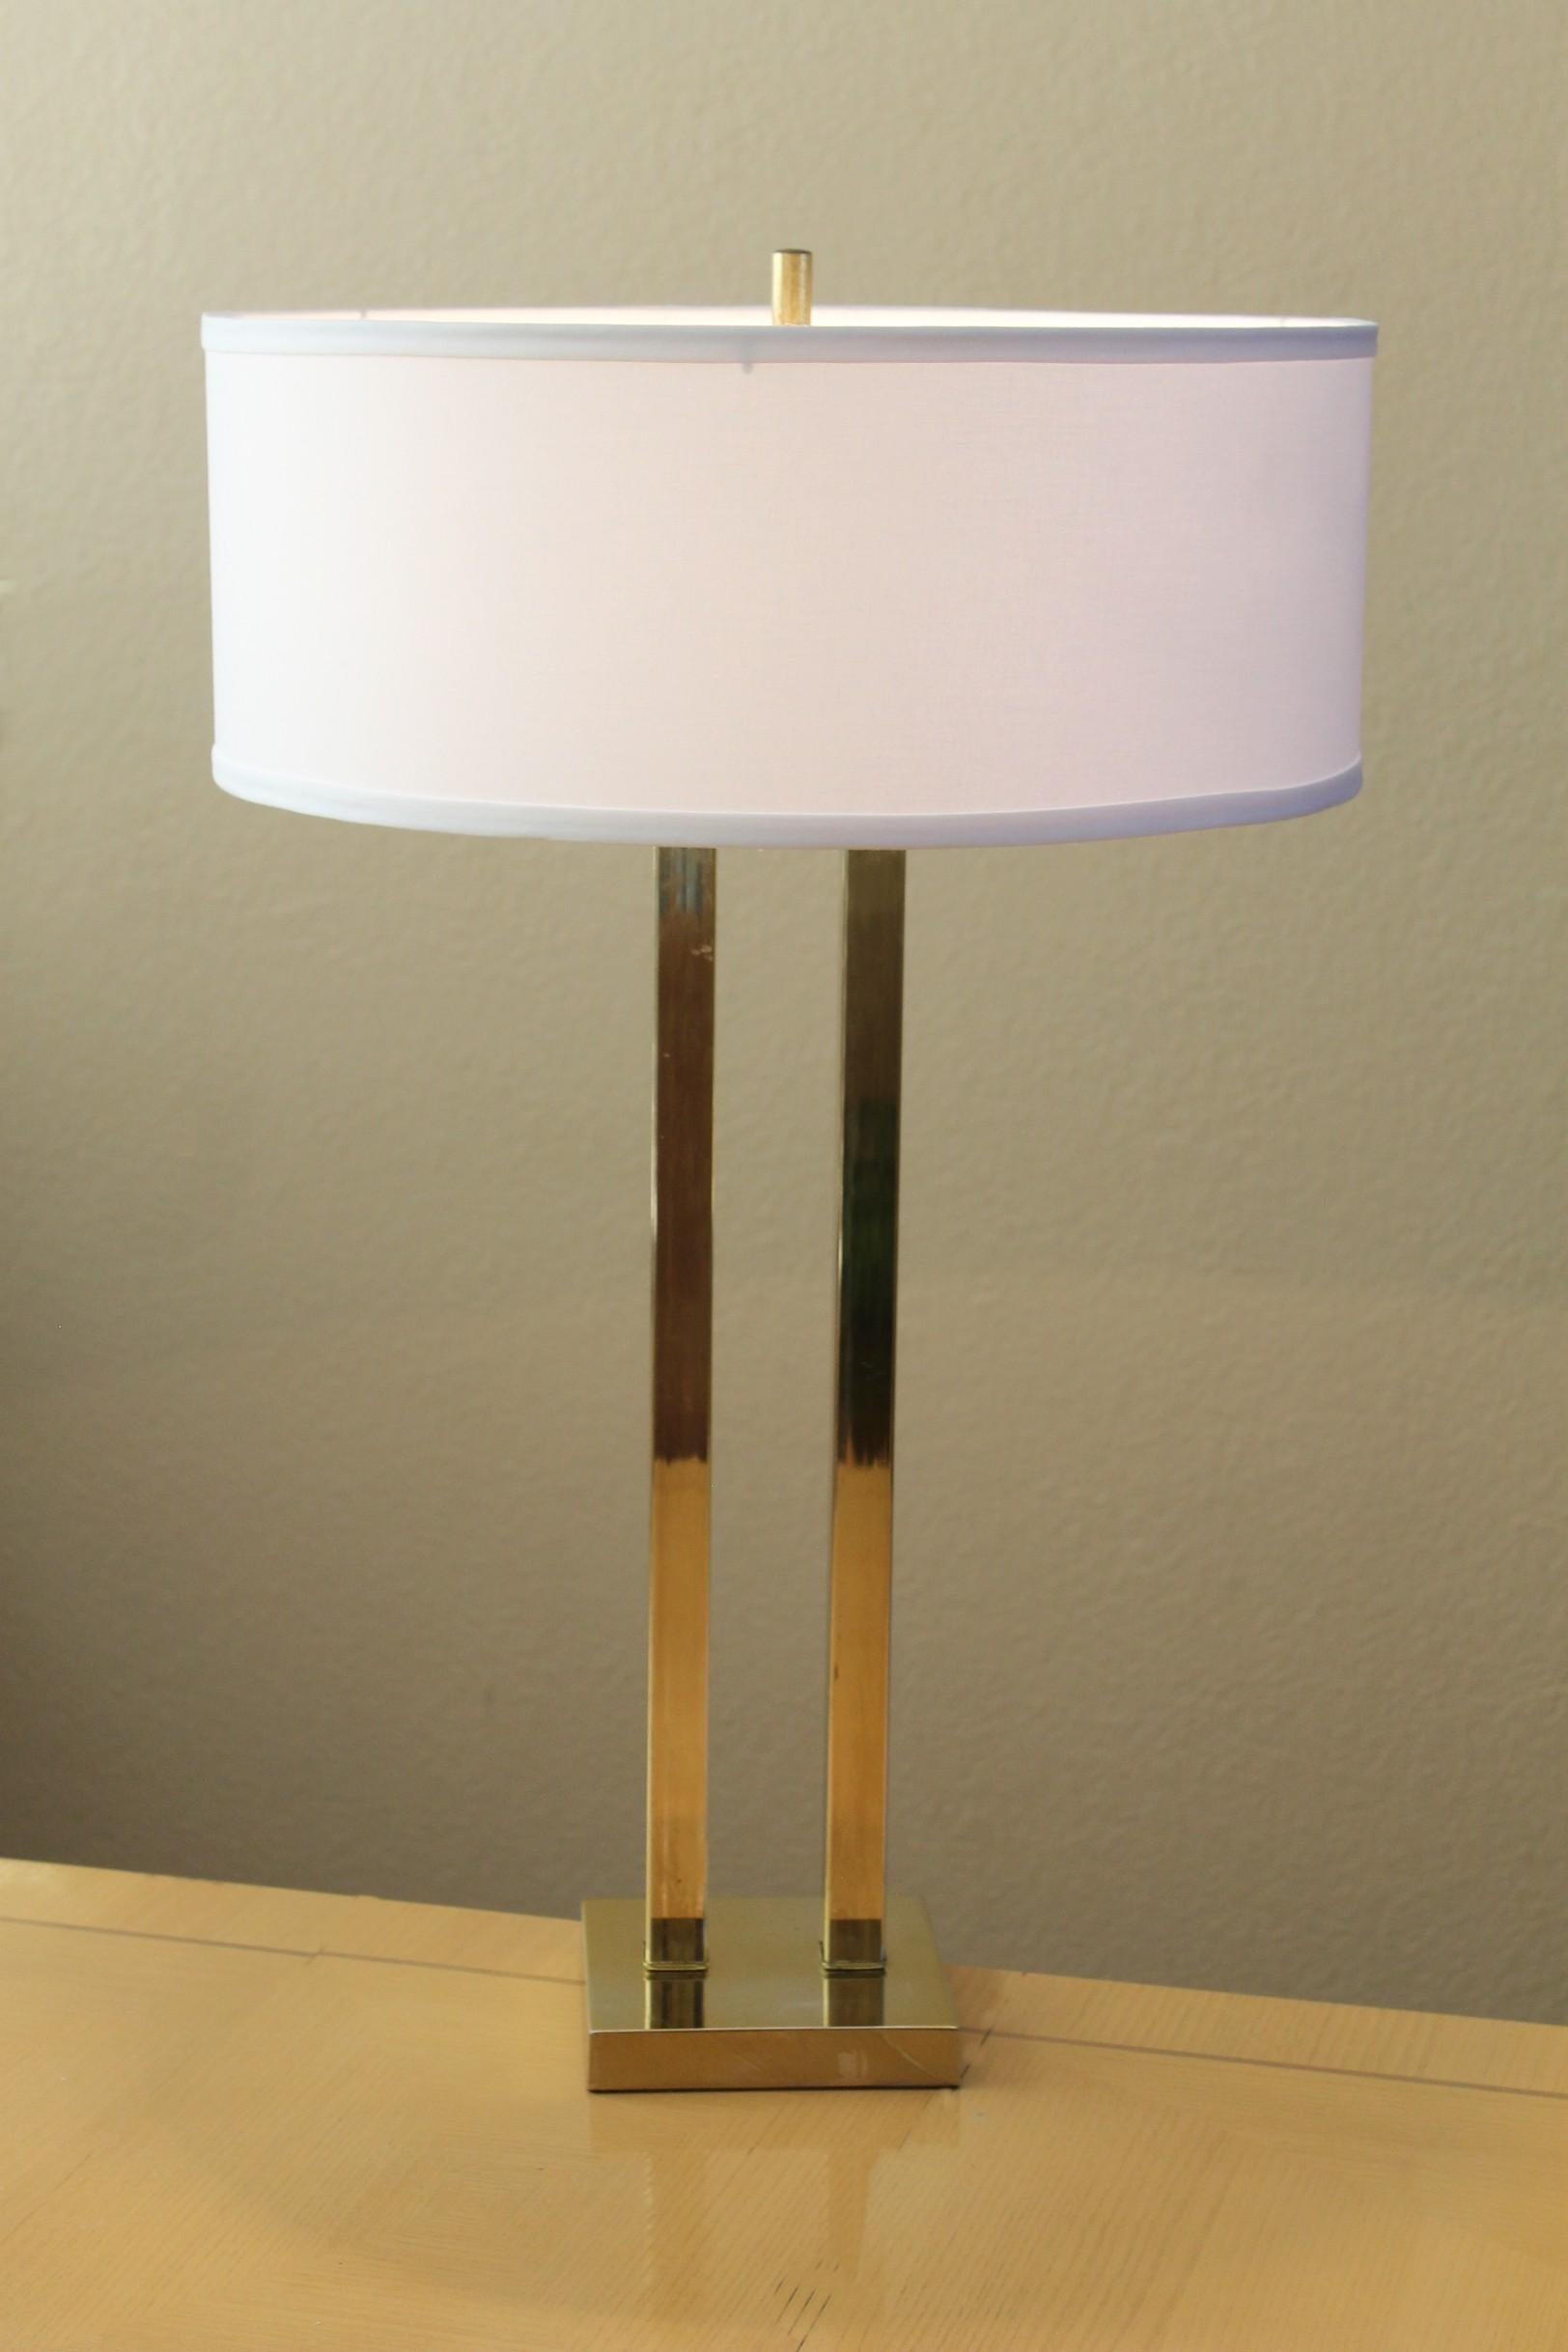 Gorgeous!

Elegant Laurel Lamp
Mid Century Modern
Brushed Brass Metal

Incredibly Clean Design!

Attributed to Richard Barr

This is a marvelous Laurel Table Lamp with double metal pillars in brushed brass. This lamp and its clean lines and refined